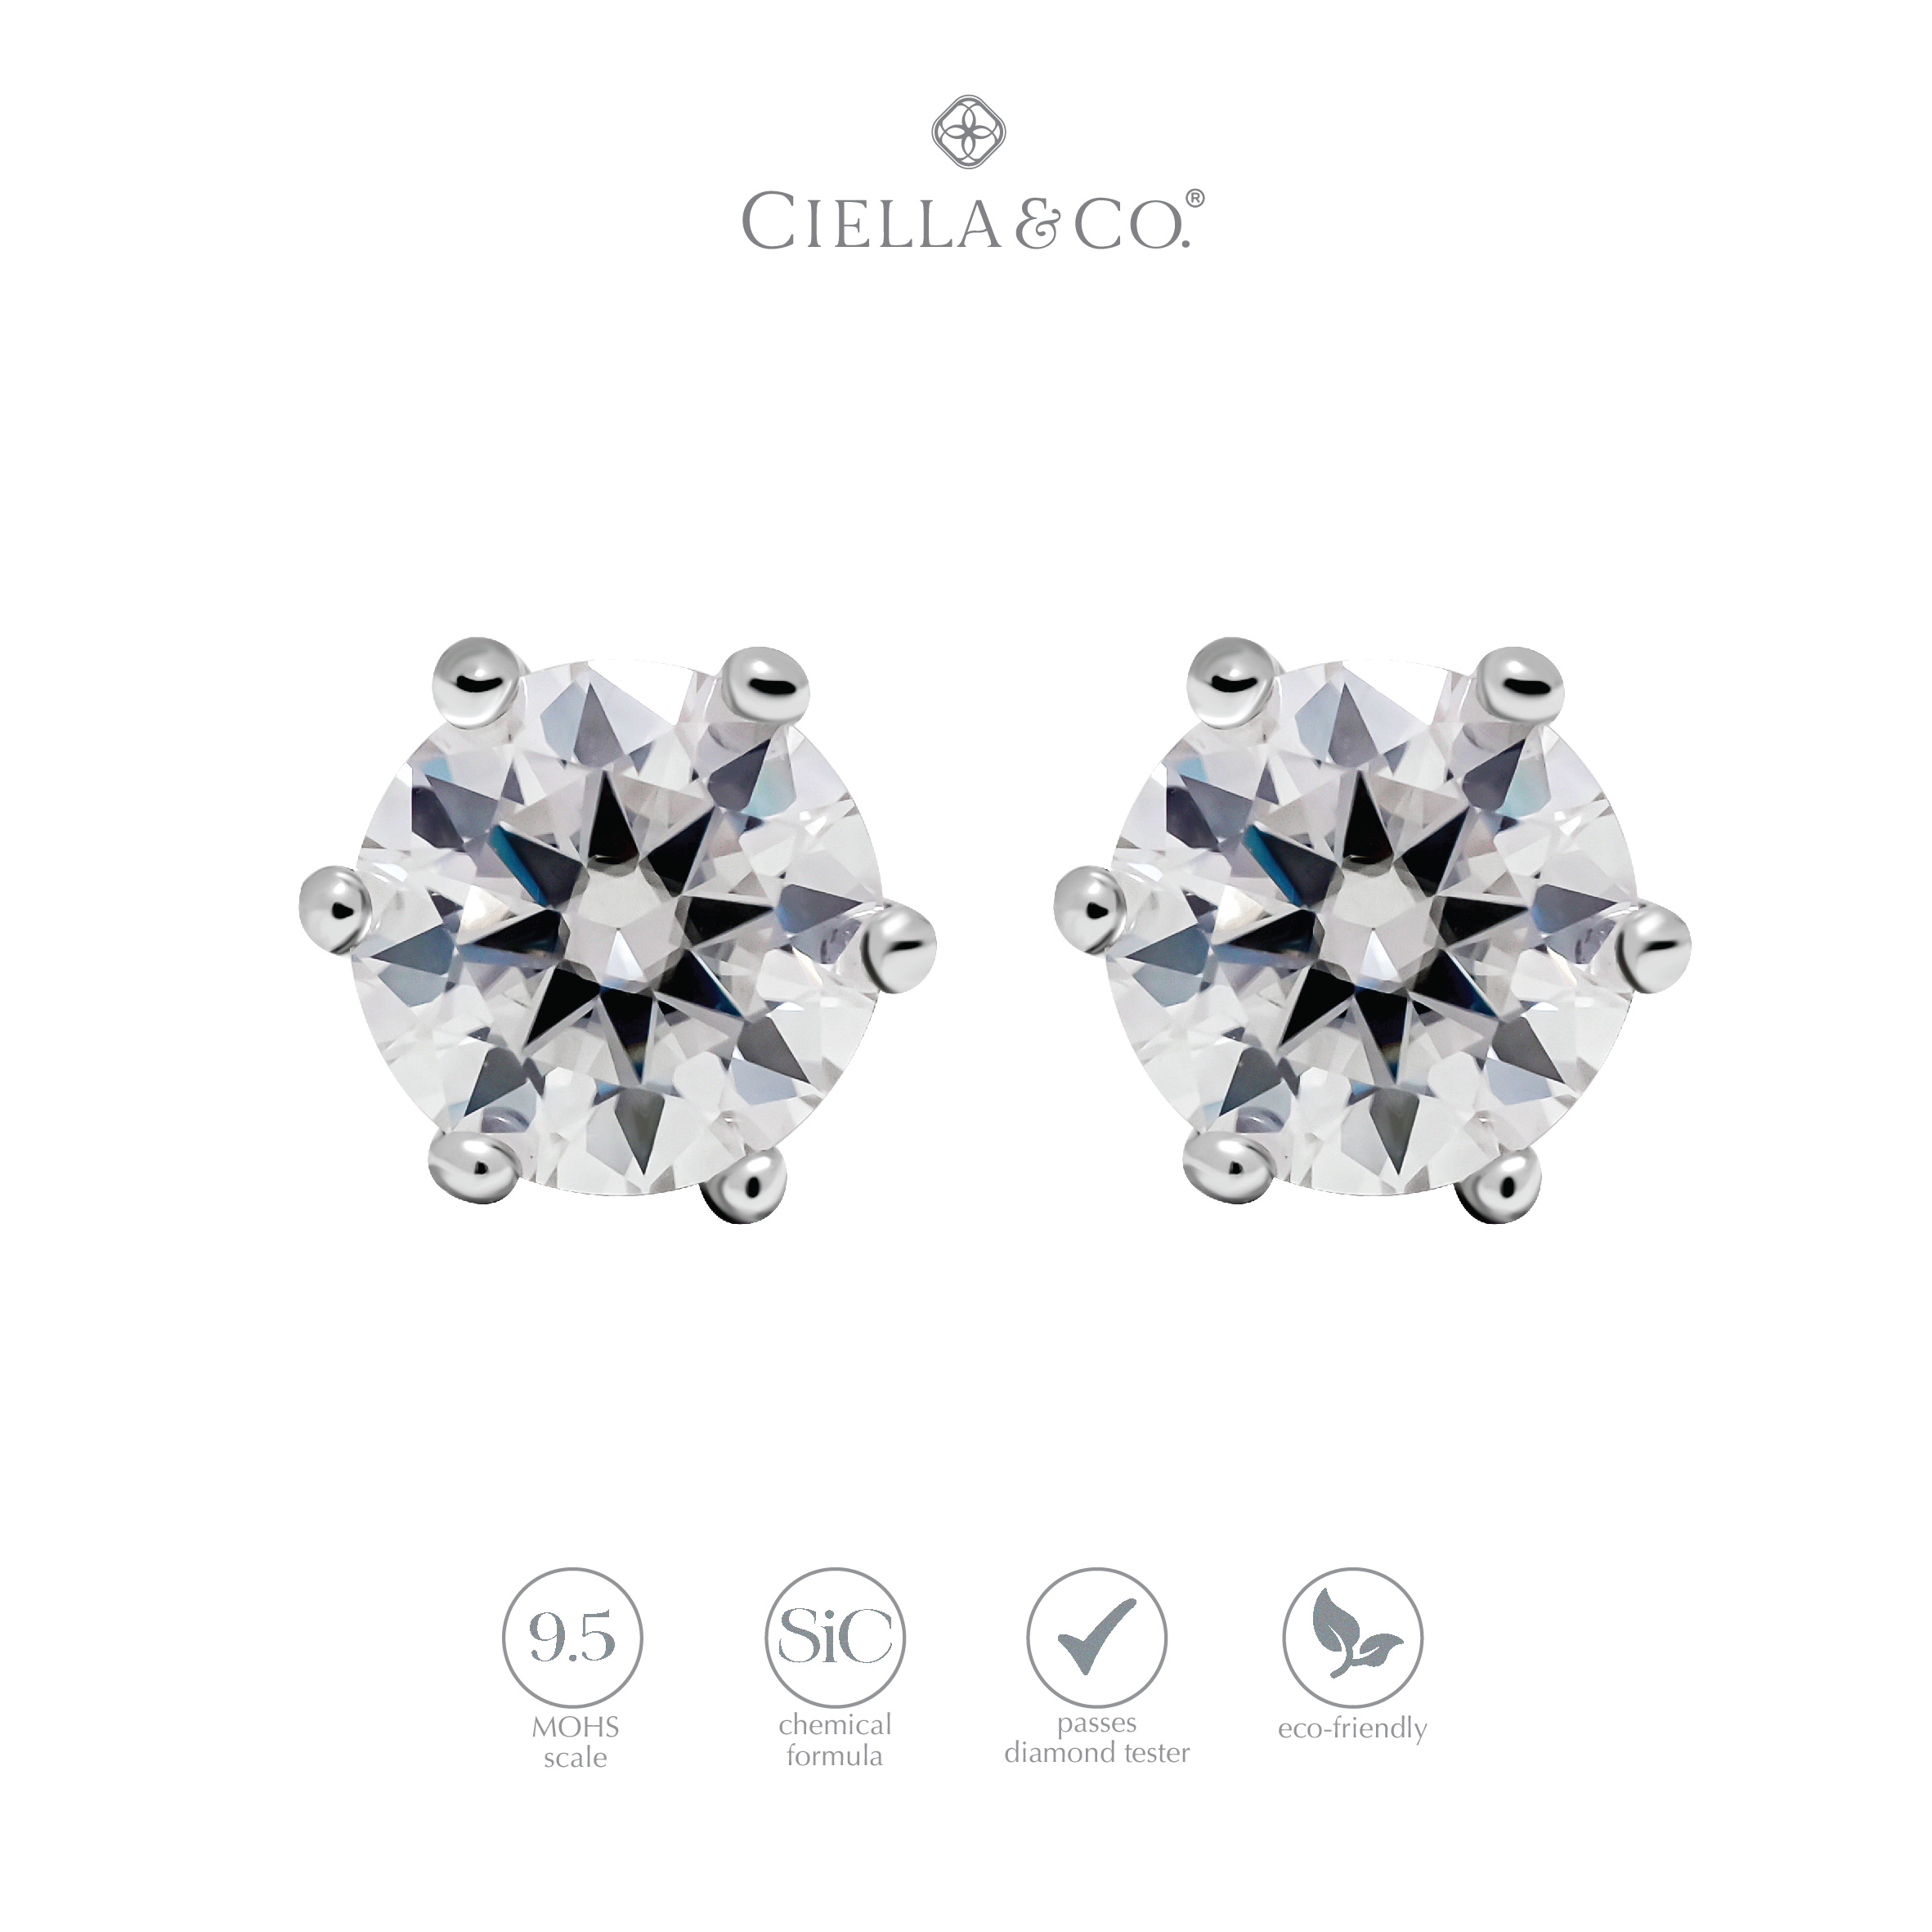 anting-moissanite-ciella-co-6-prong-round-cut-studs-earrings